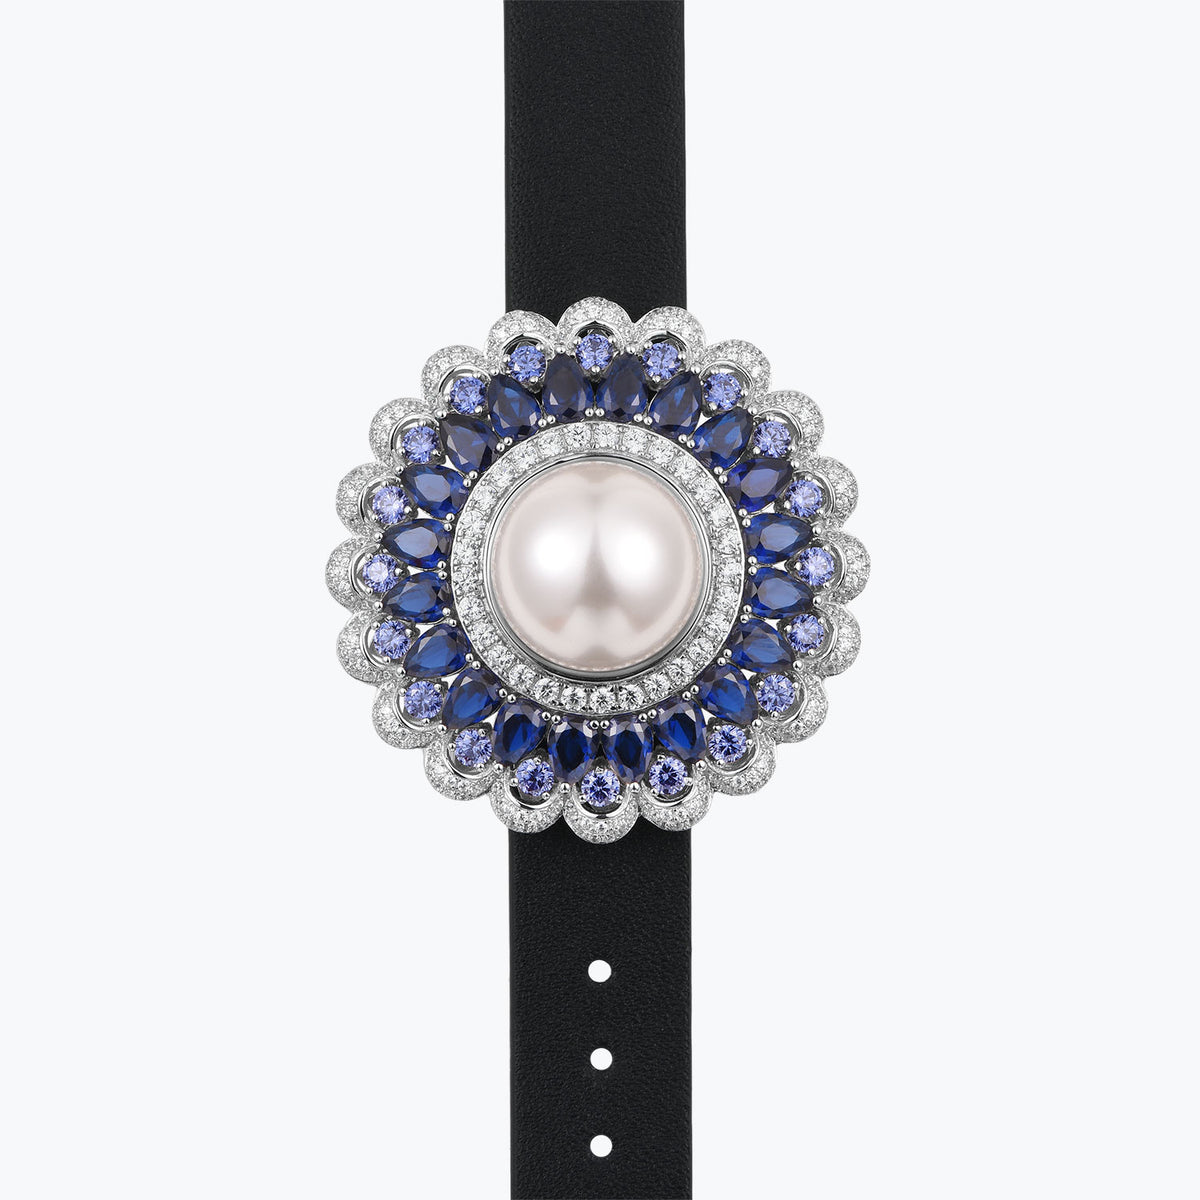 Dissoo® Blue Floral Halo Cluster Pearl Brooch/Pin & Leather Bracelet